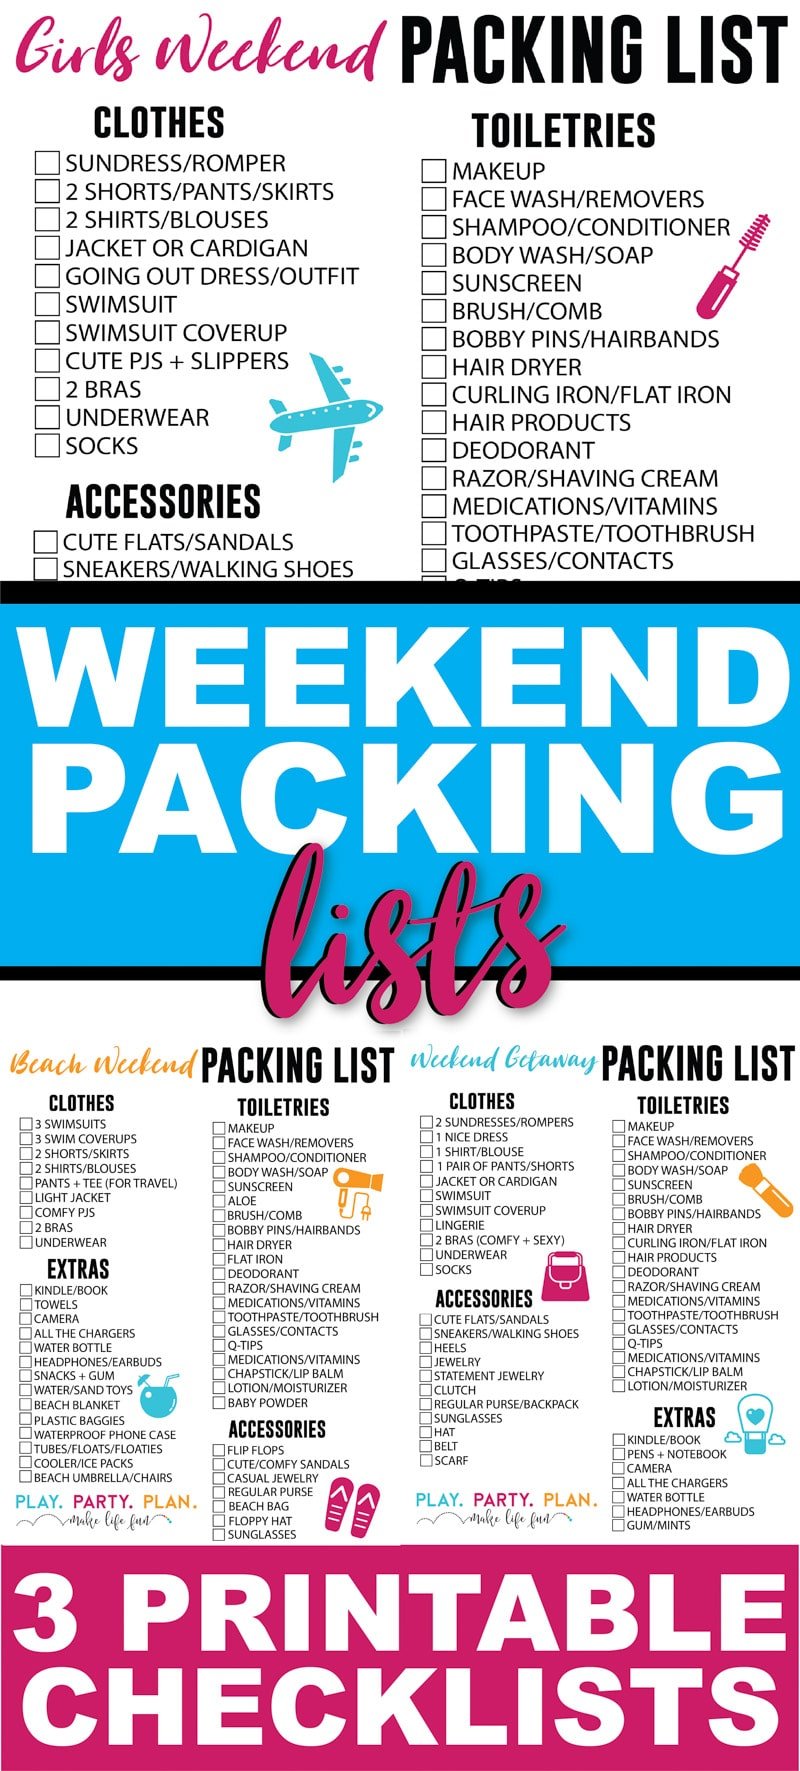 The perfect weekend packing list for a 3 day spring or summer romantic weekend getaway! Ideal if you want to travel light and are going the city, mountains, or even on a road trip!